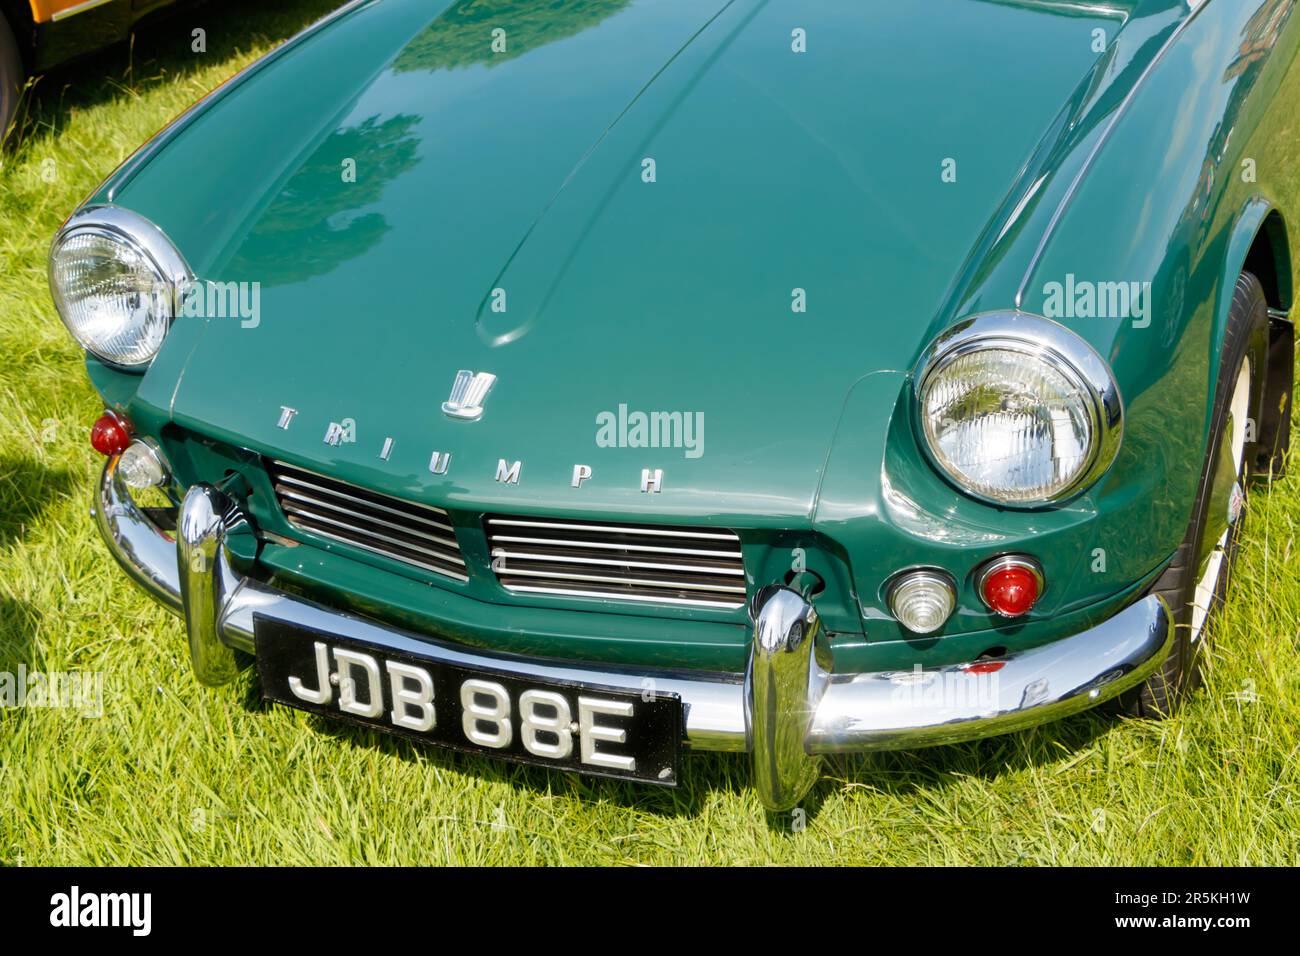 front view bonnet of green classic 1960s triumph 1967 60s  Spitfire Mk2 British sports car convertible at vintage classic car show Capesthorne Hall Ch Stock Photo